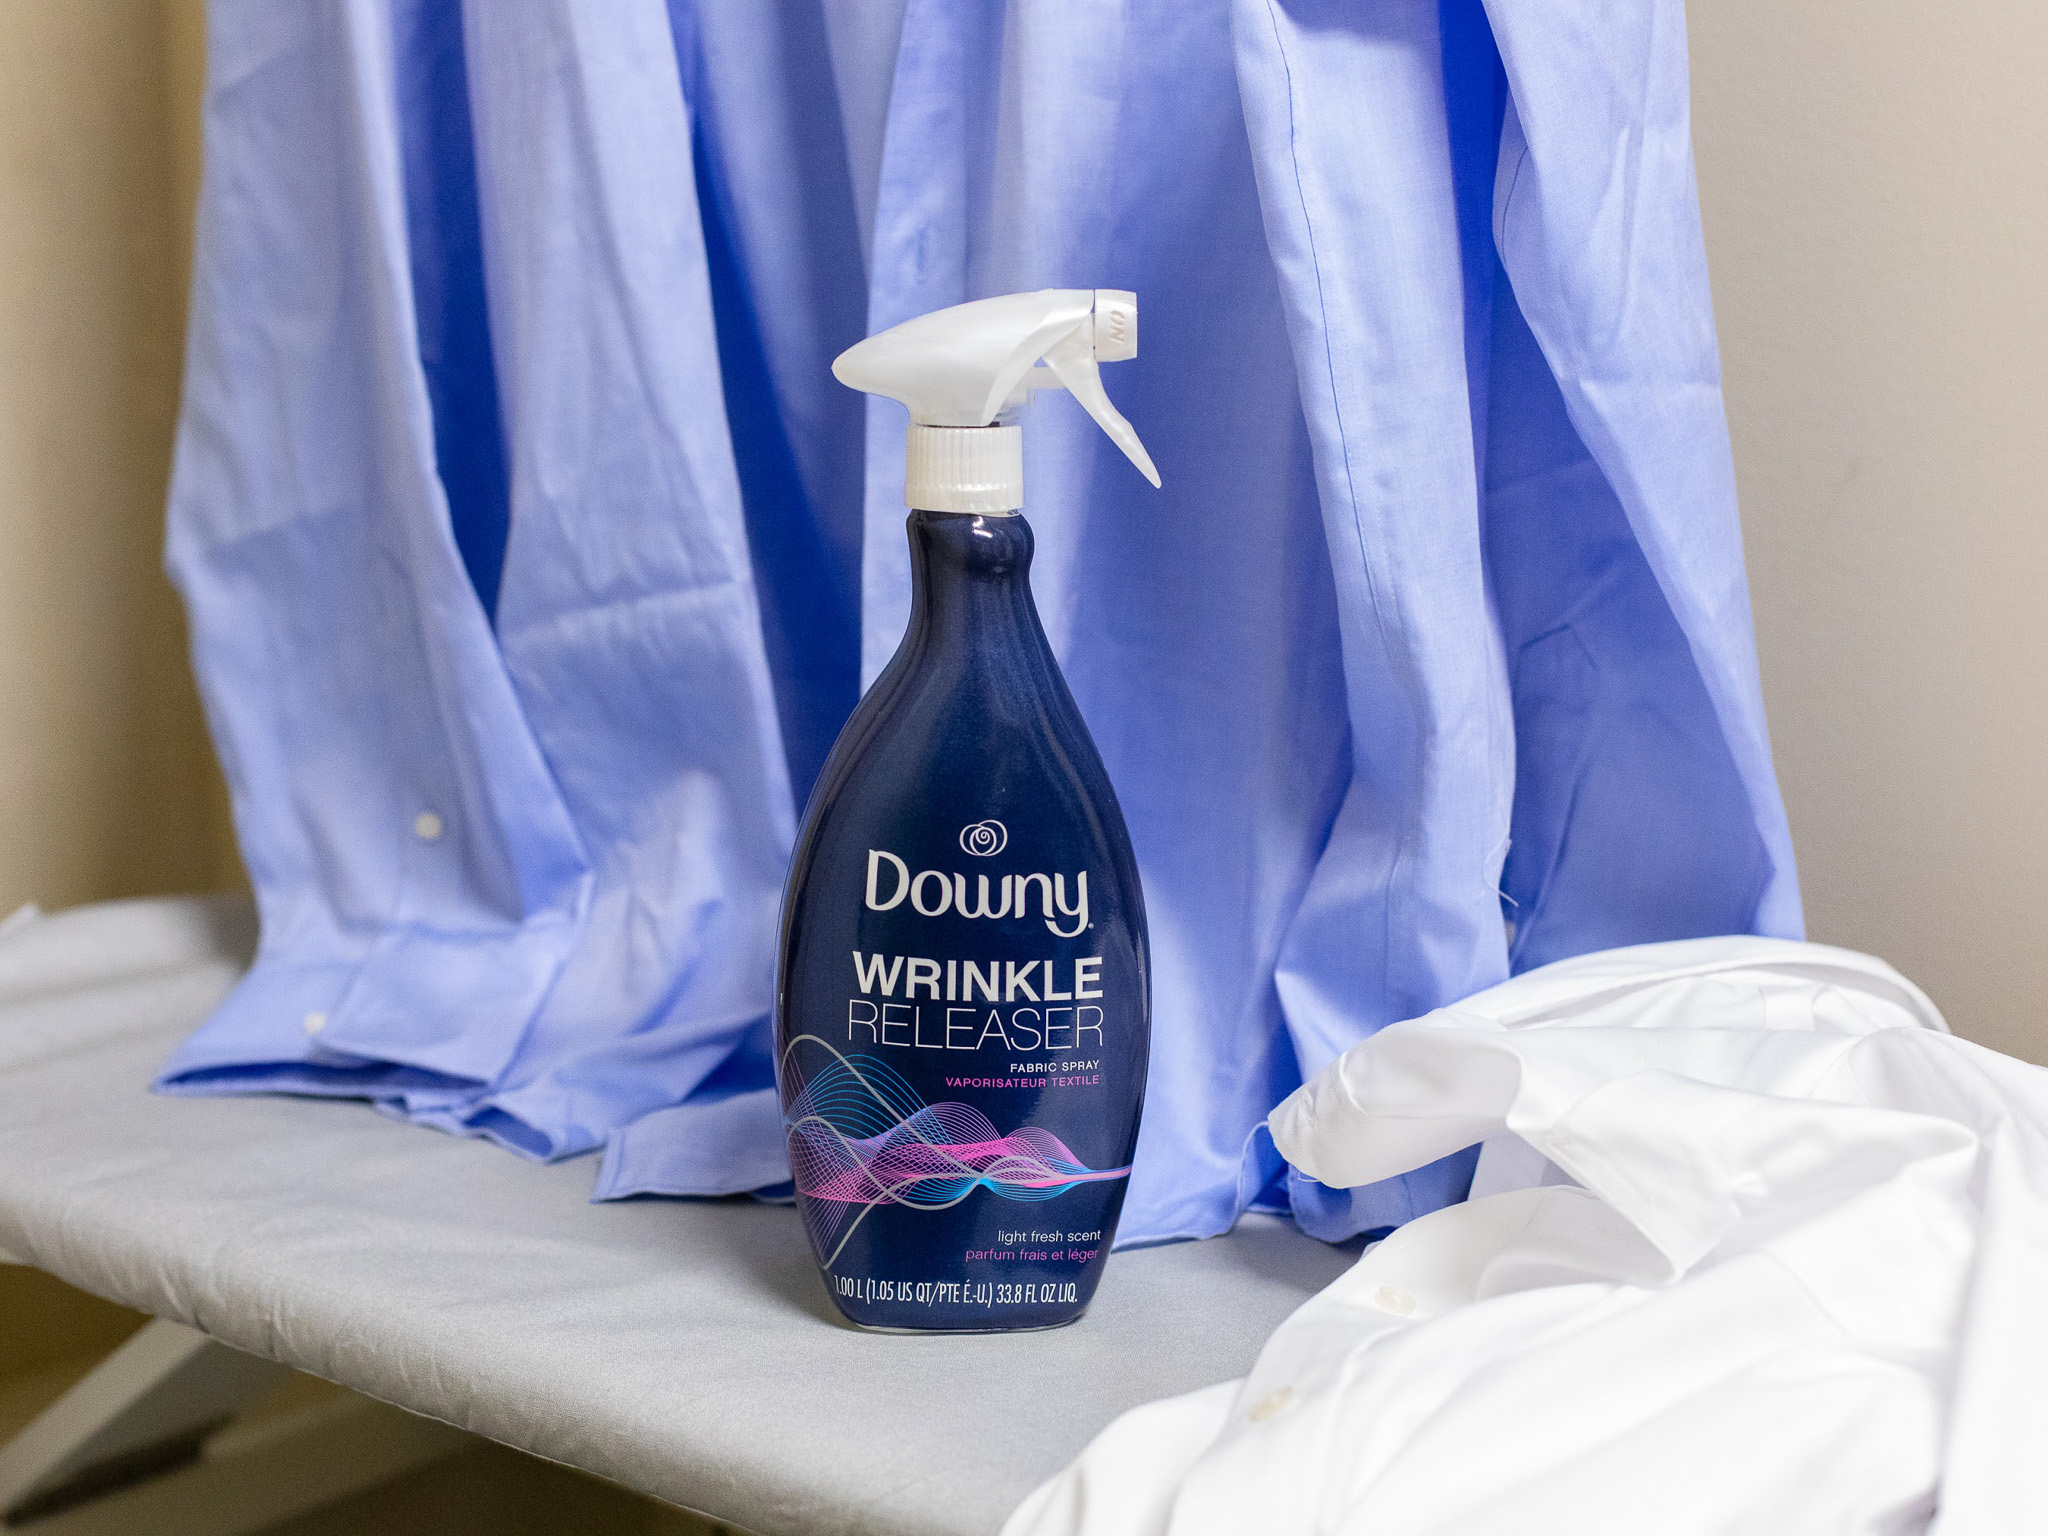 Make Mornings Easier With Downy Wrinkle Releaser And A FREE Publix